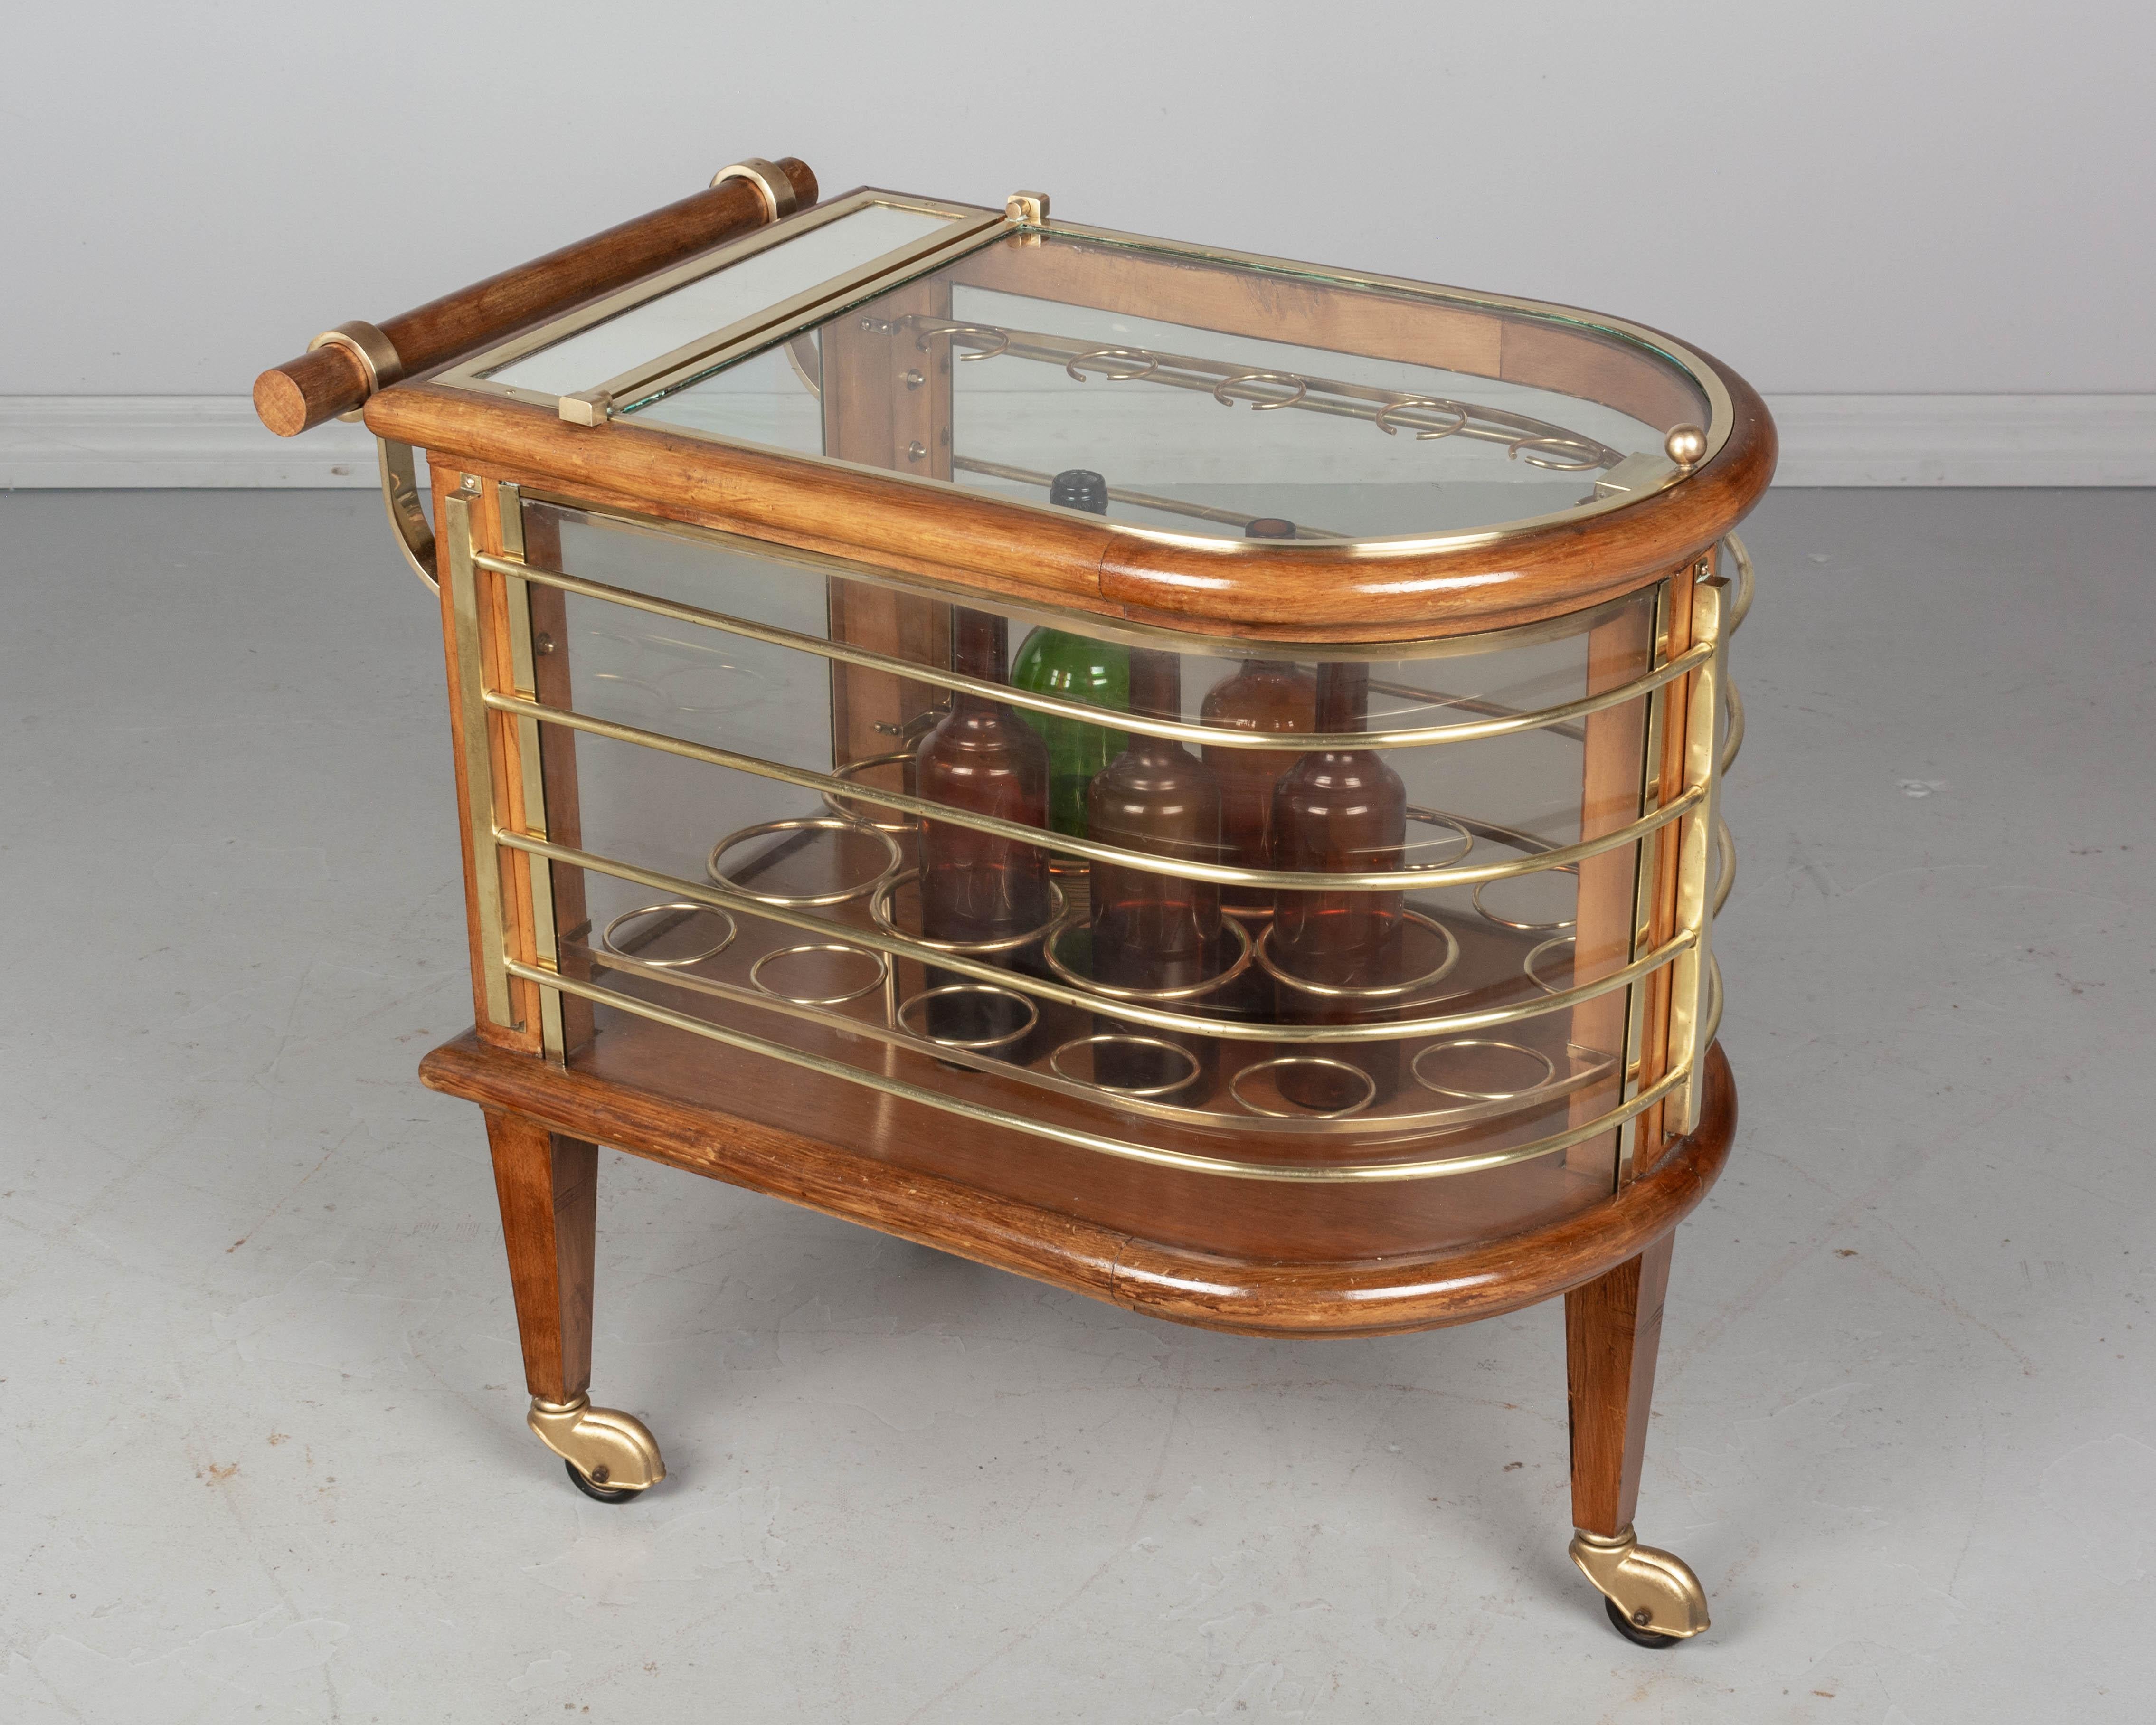 Brass French Art Deco Style Bar Cart, or Cocktail Trolley by Louis Sognot